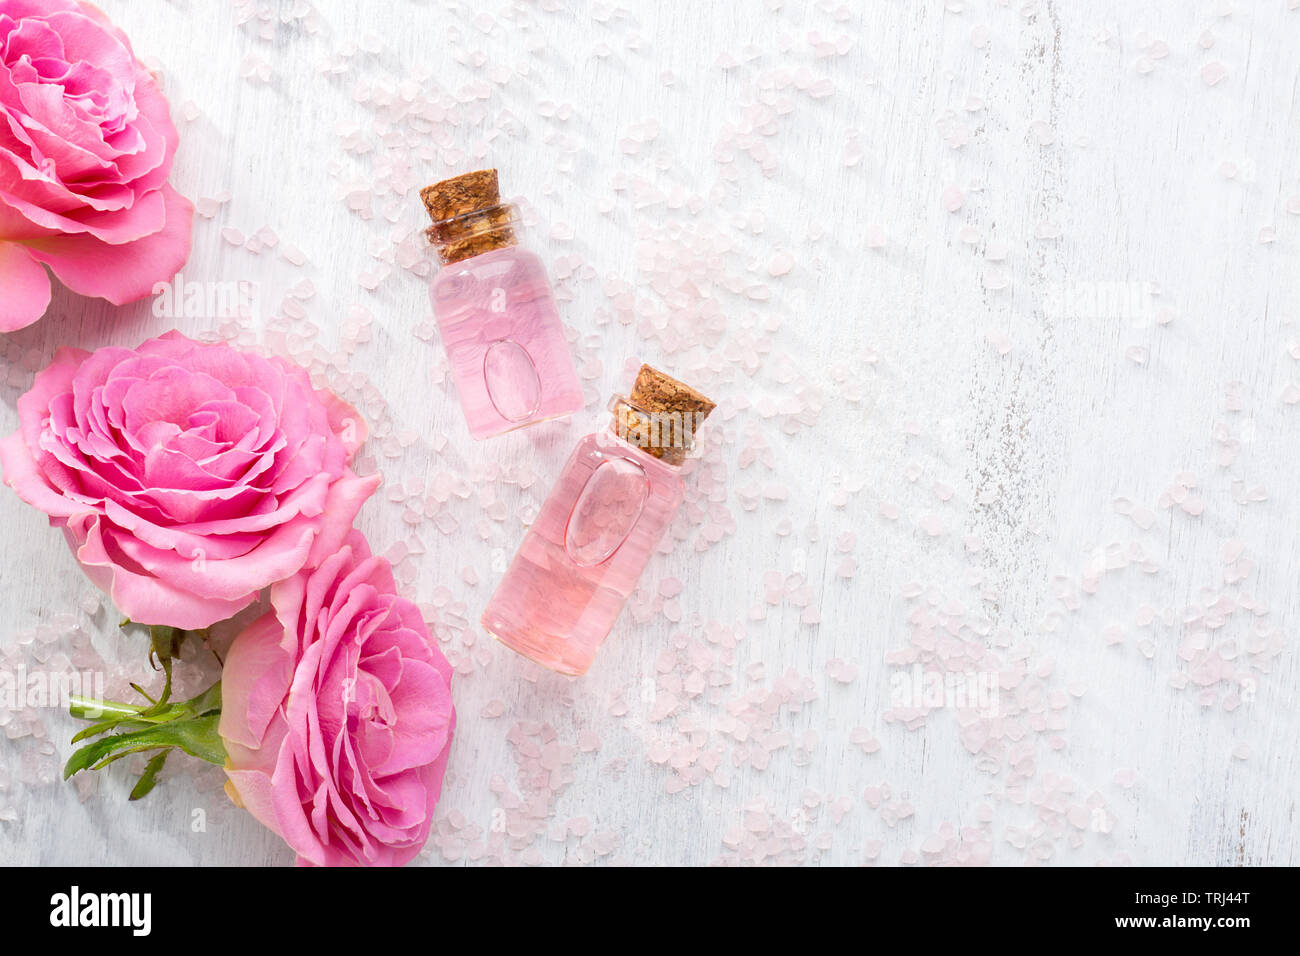 Two bottles with rose oil, crystals of mineral bath salts and pink roses on the wooden table. Stock Photo